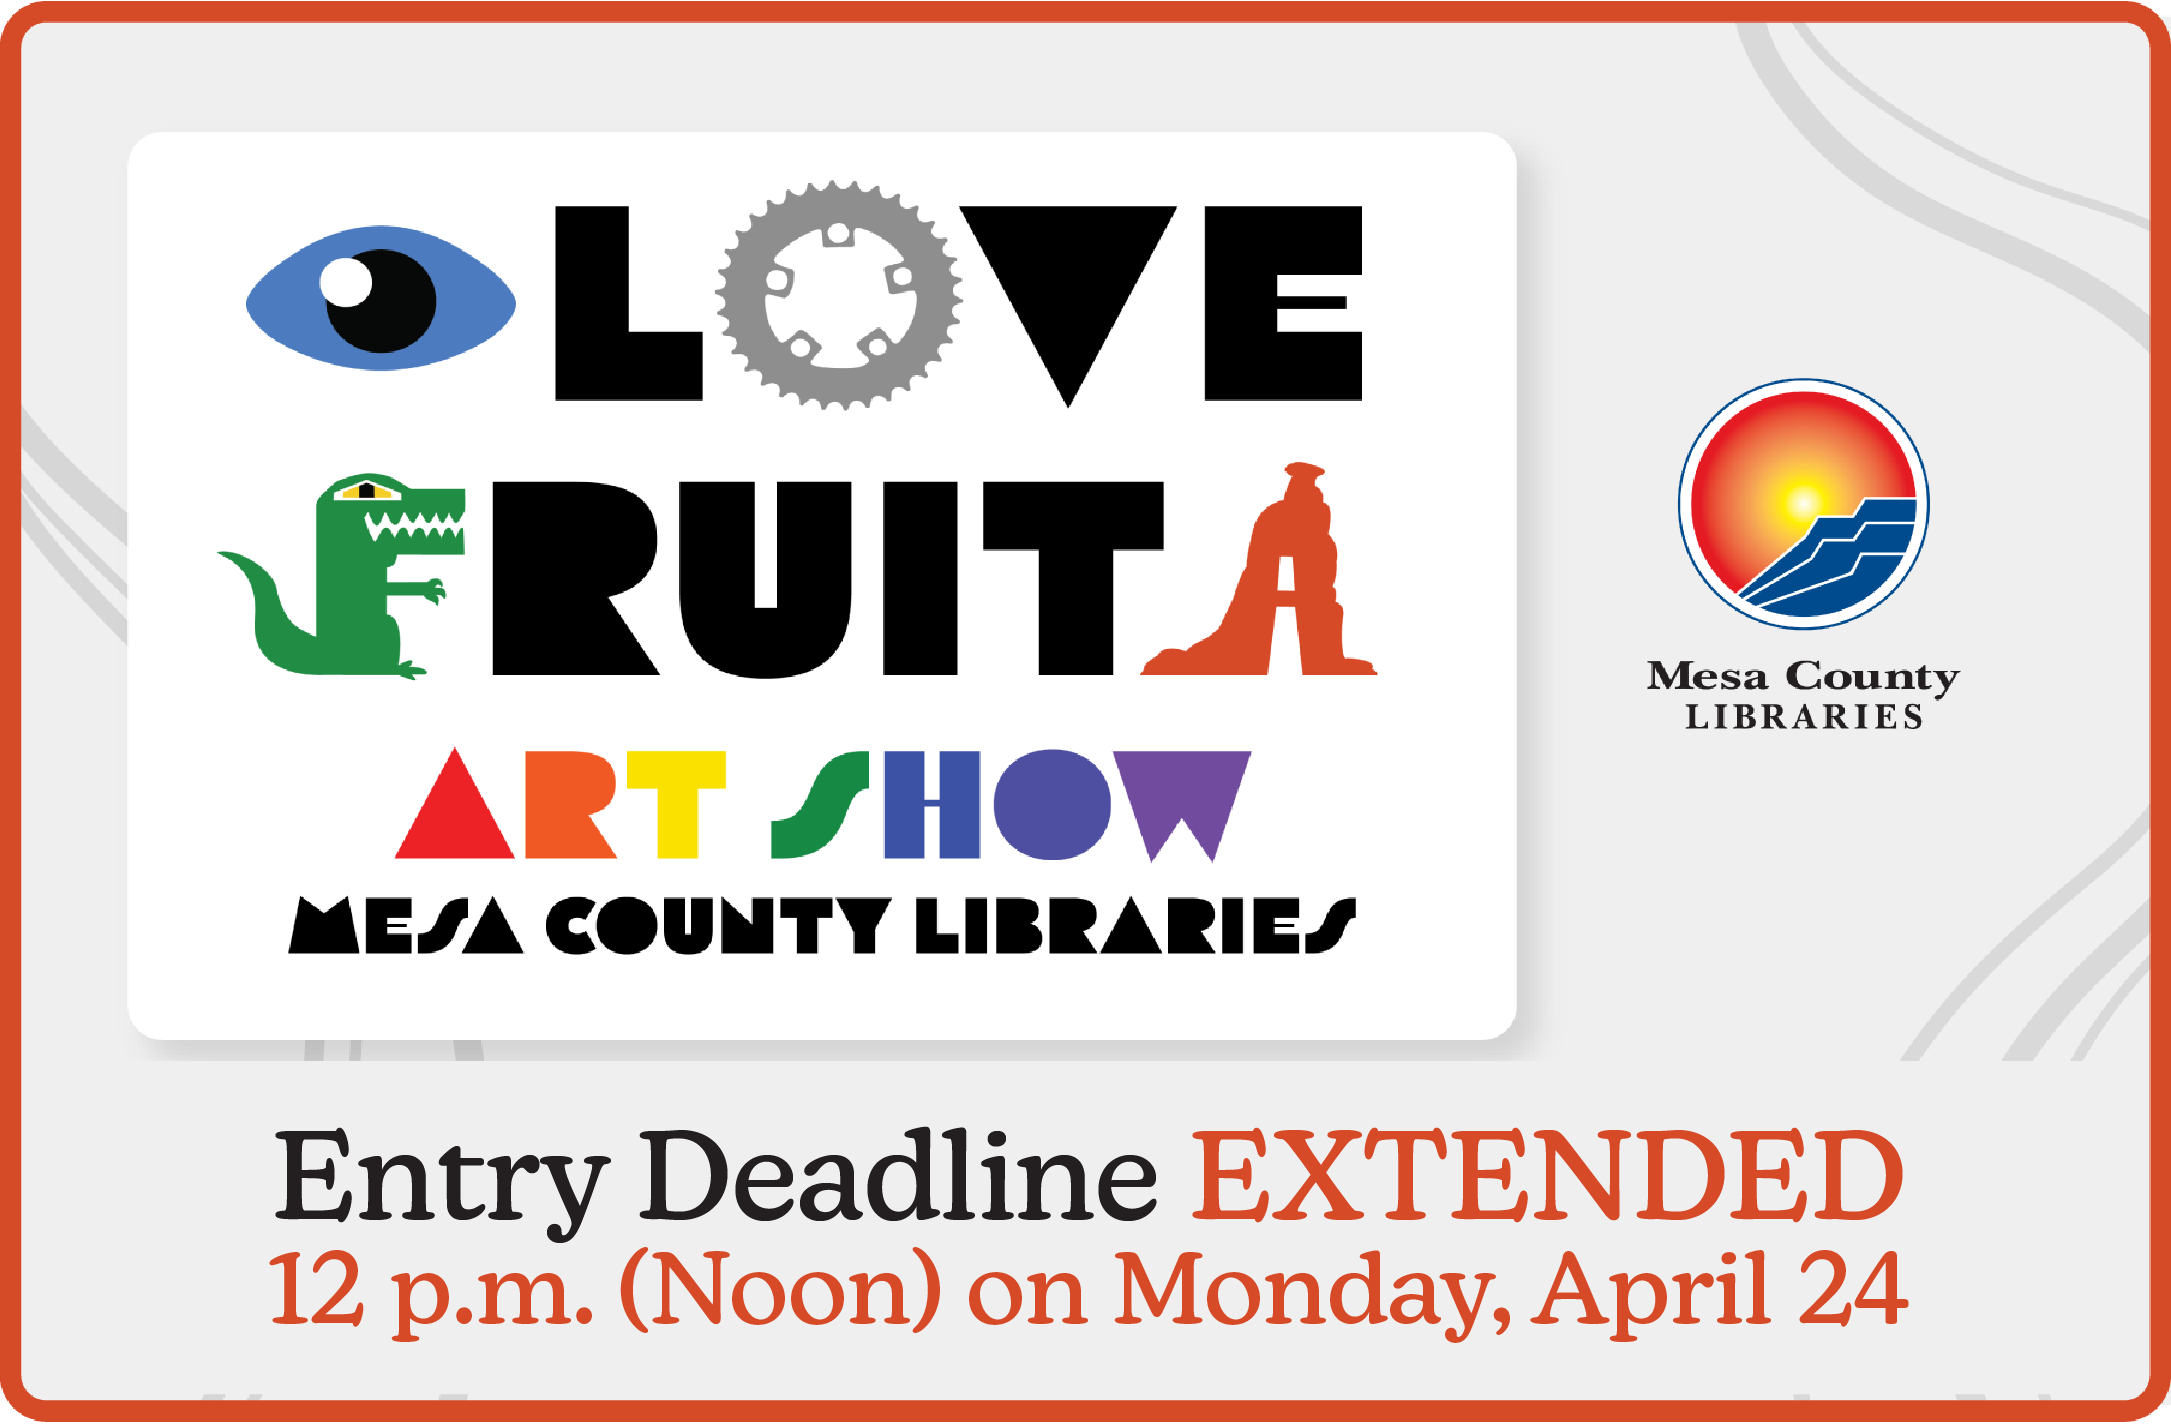 Eye Love Fruita Art Show Call for Artists: Entry deadline extended to 12:00 p.m. on Monday, April 24.